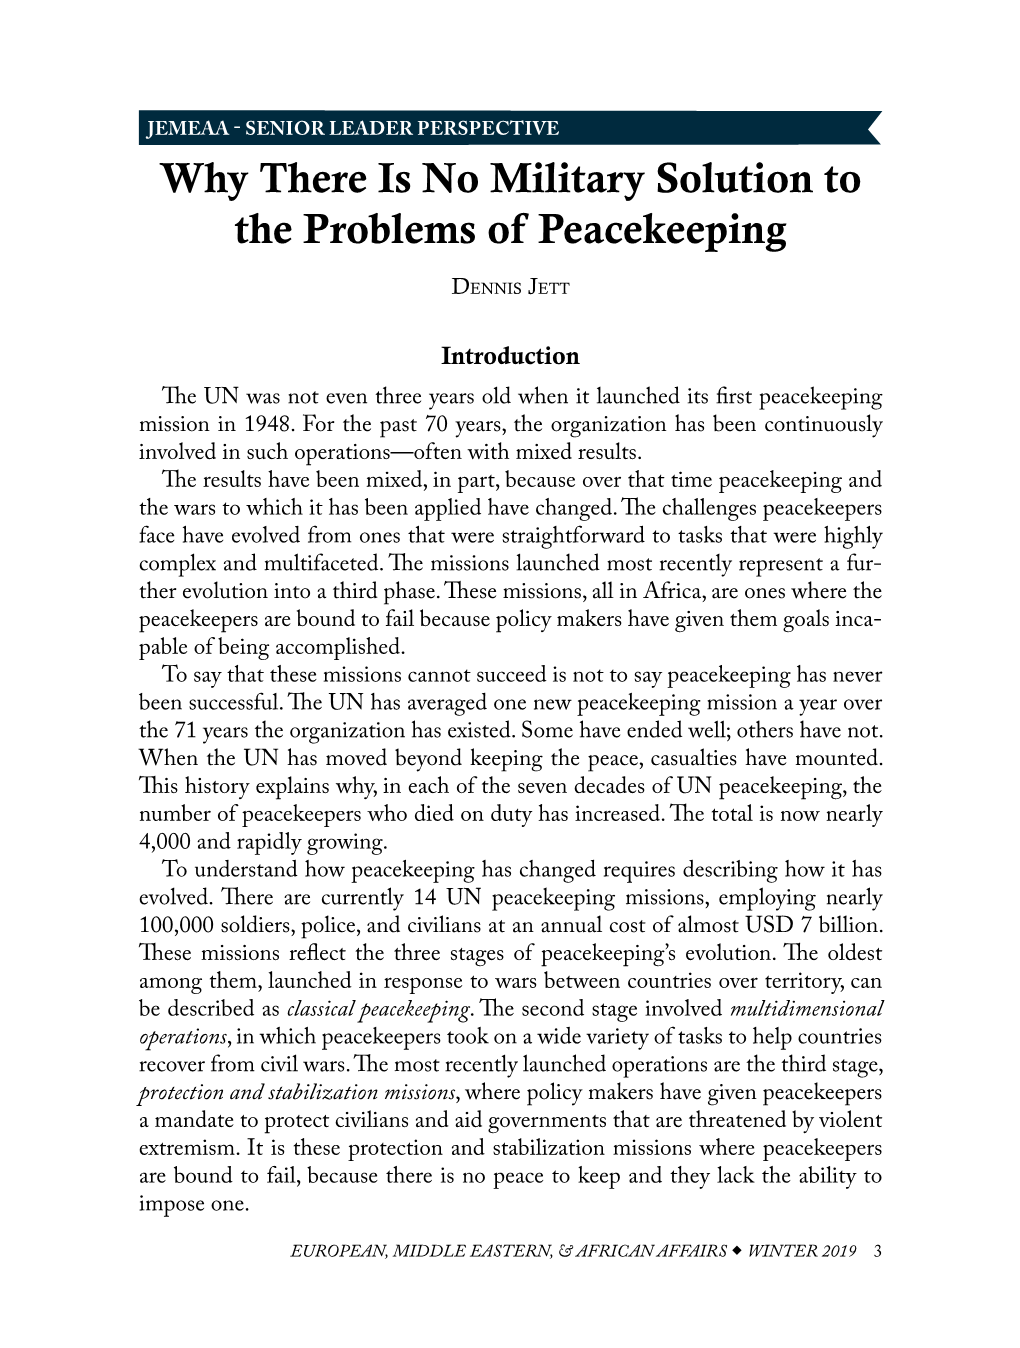 Why There Is No Military Solution to the Problems of Peacekeeping